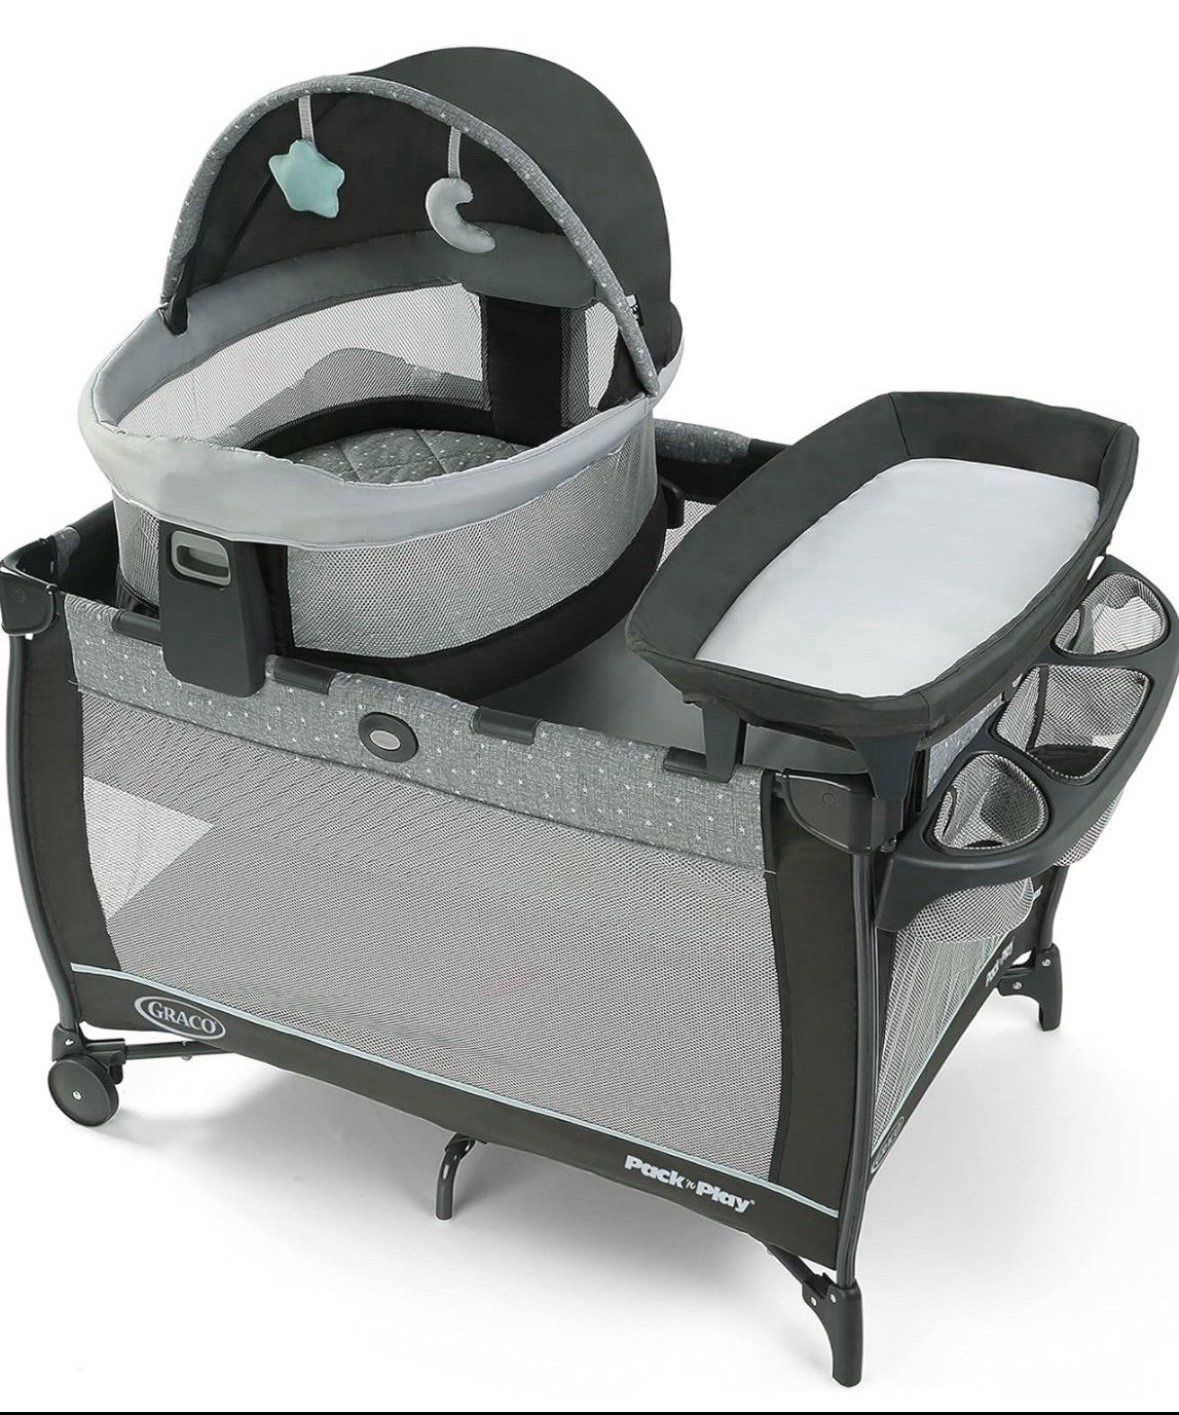 Graco® Pack ‘N Play® Travel Dome™ DLX Playard, Astin  Open box item  INVENTORY NUMBER: 10(contact info removed)2